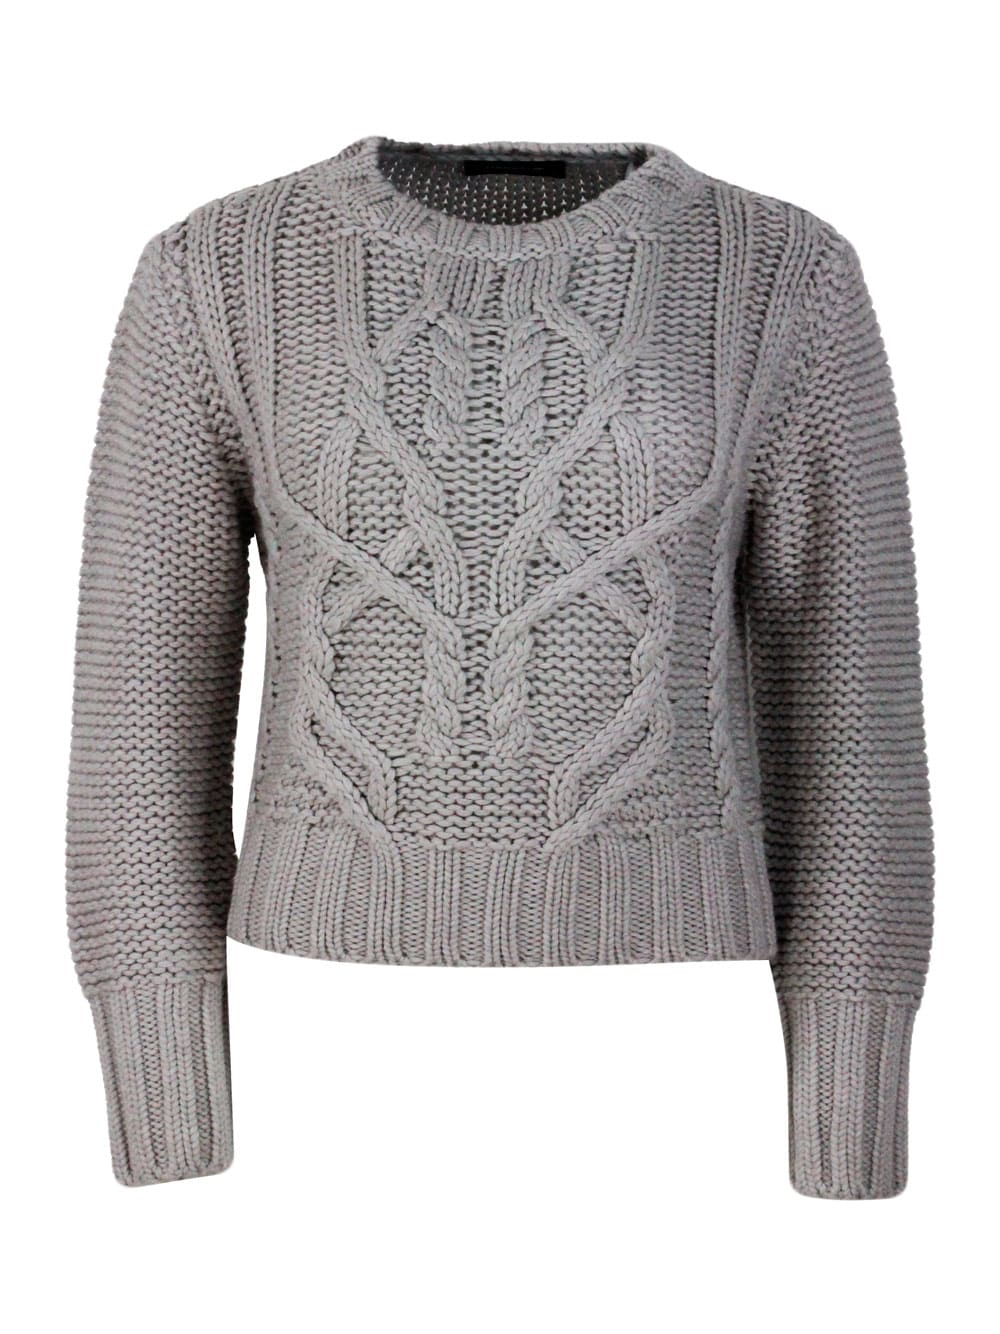 Long Sleeve Crewneck Sweater In 100% Soft Virgin Wool With Cable Knit On The Front